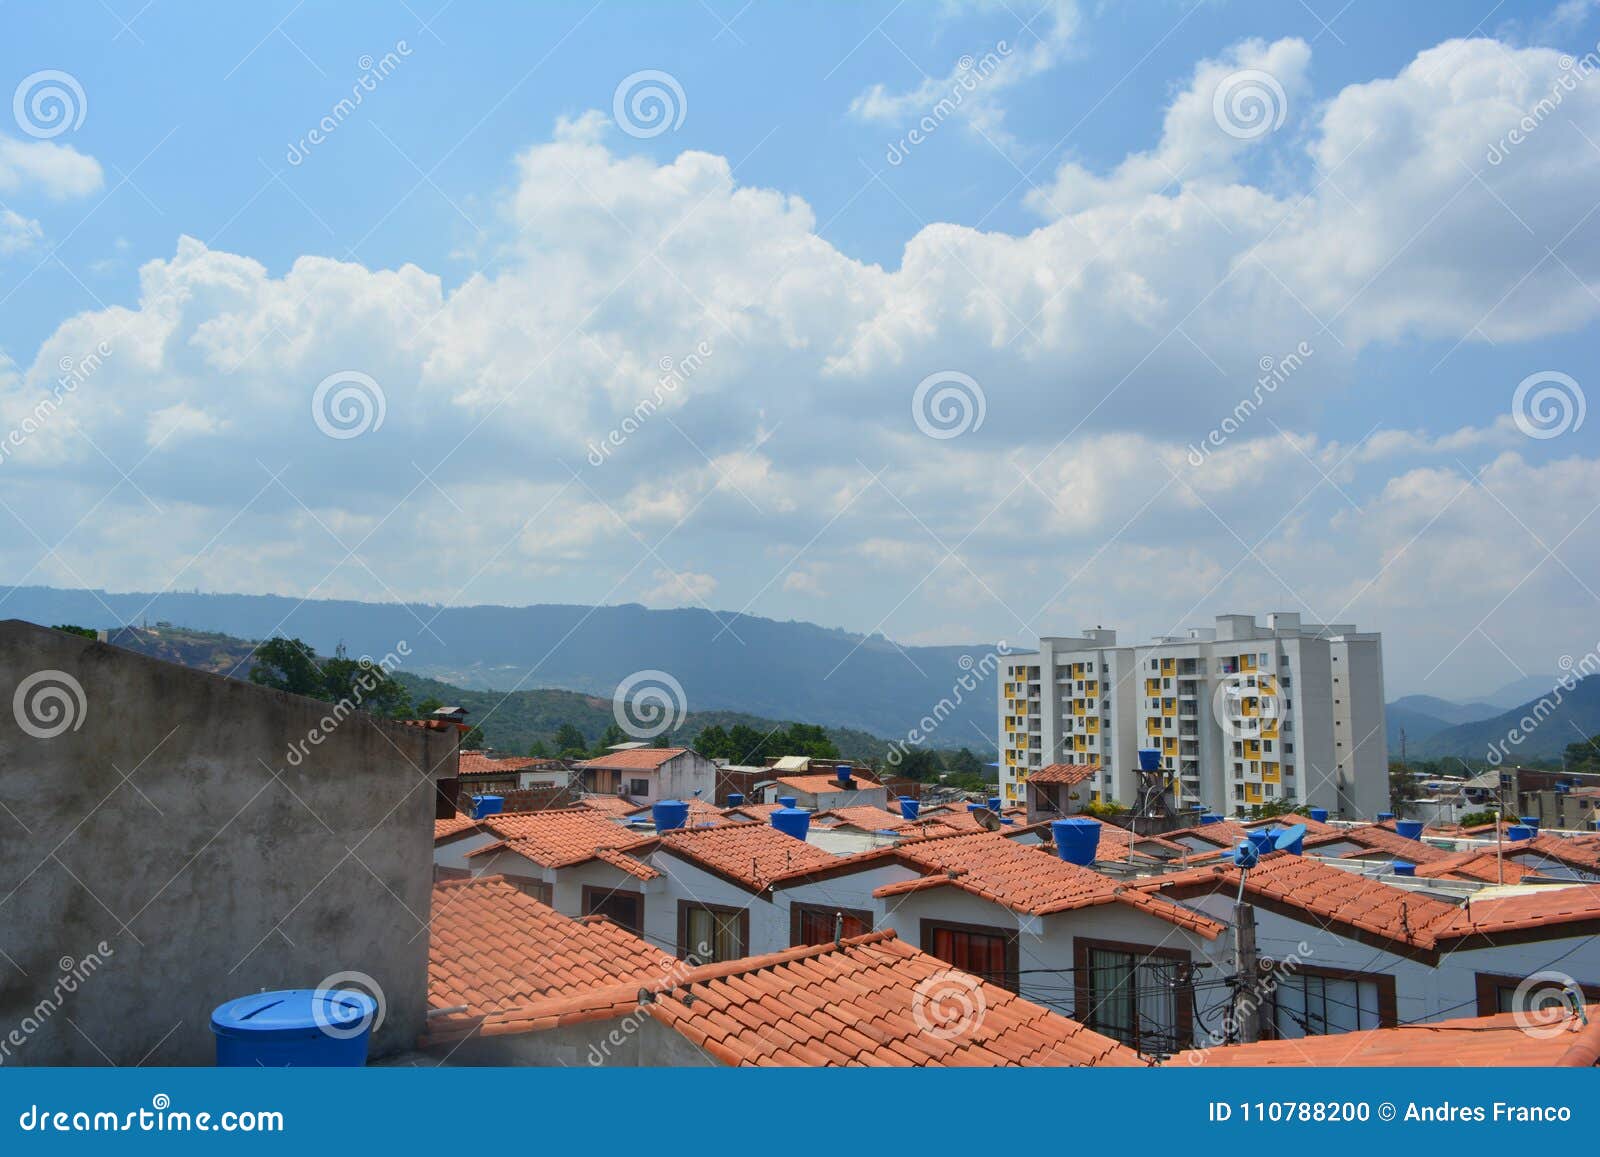 a landscape of some houses seen from the roof and a concrete wall with a blue sky in the background